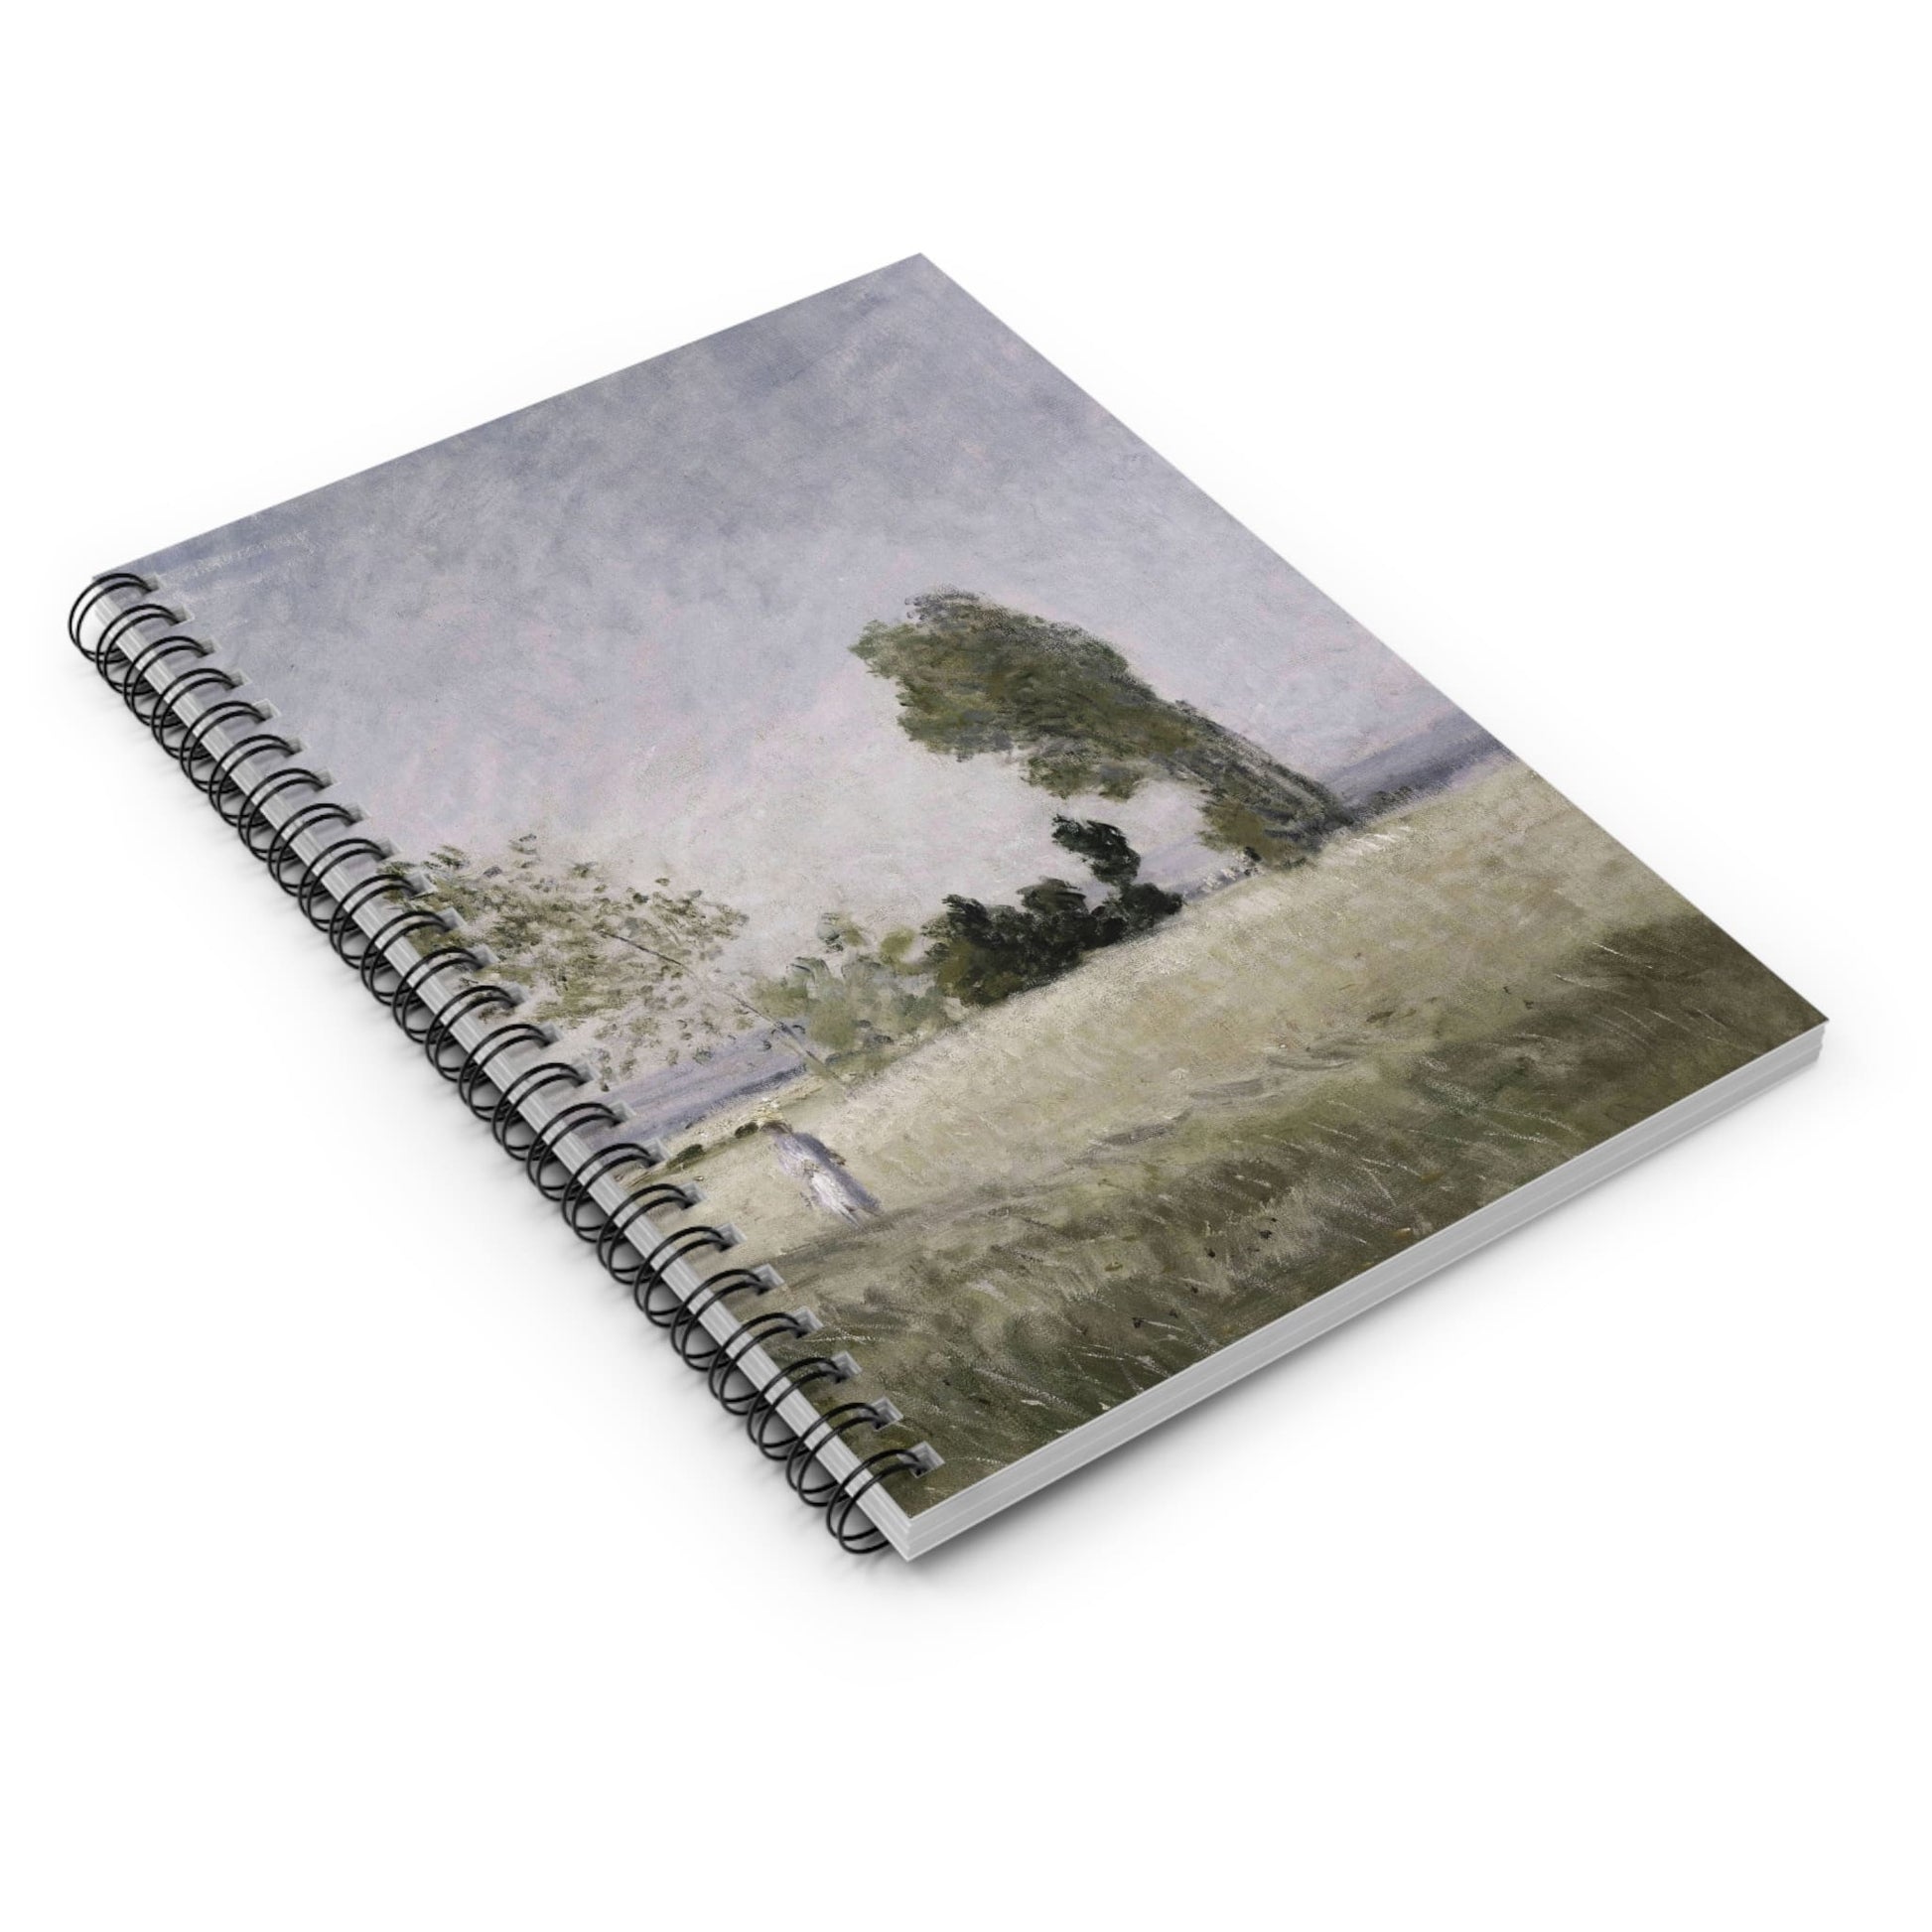 Old-Timey Get Away Spiral Notebook Laying Flat on White Surface